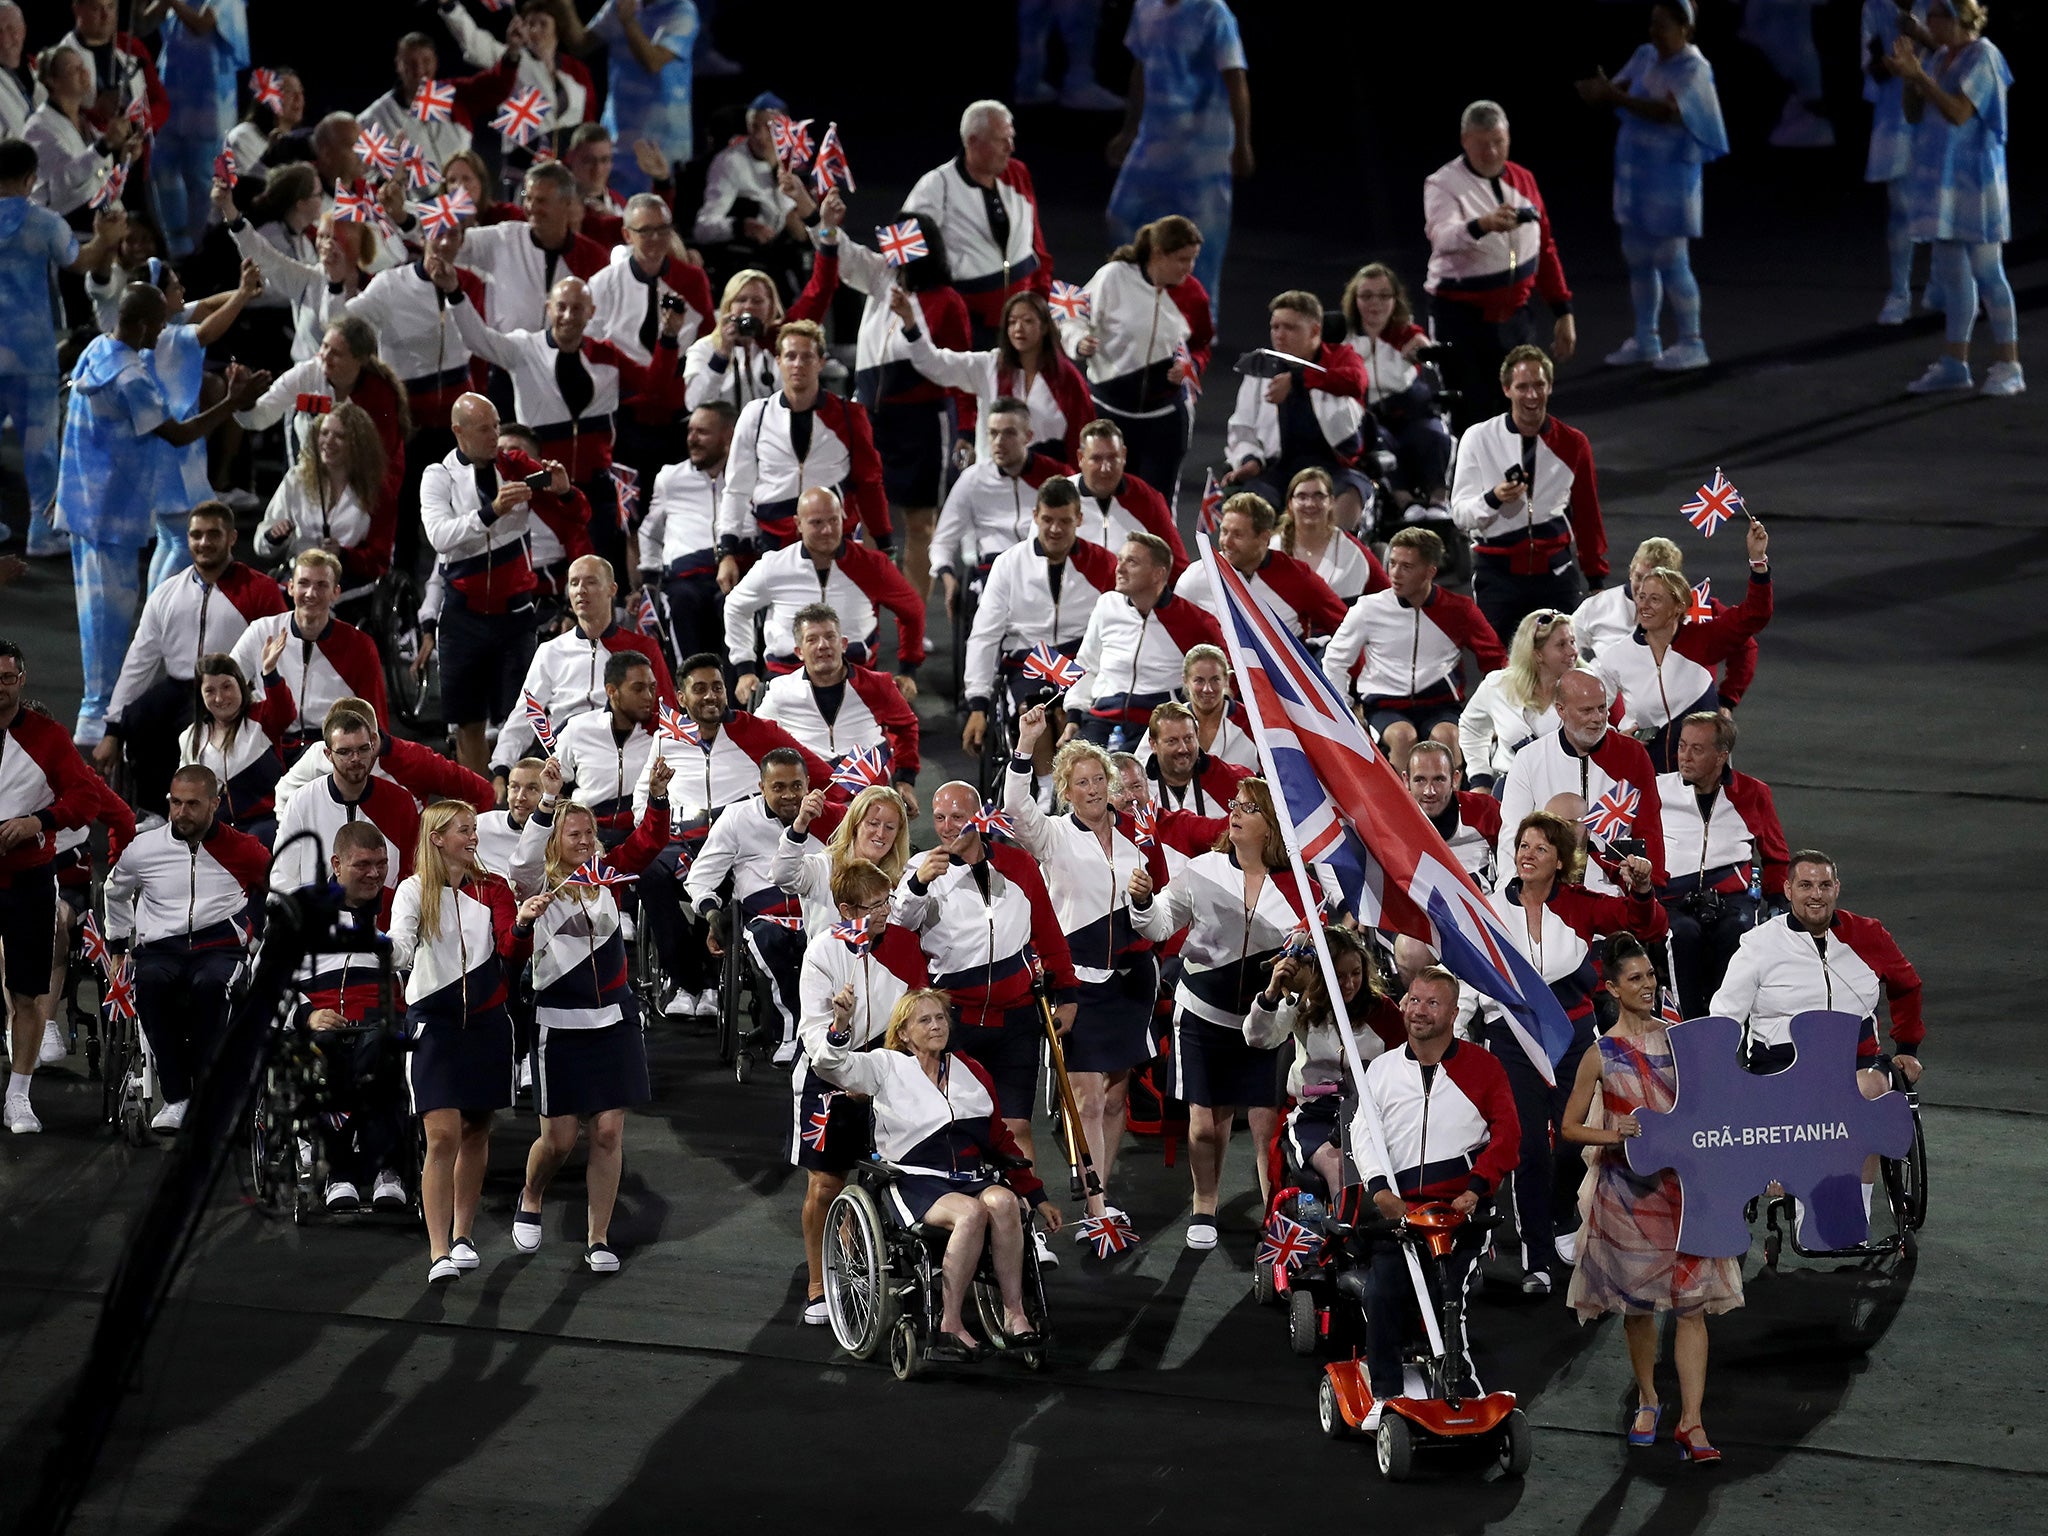 Great Britain’s Paralympians at the opening ceremony of the Paralympics in Rio